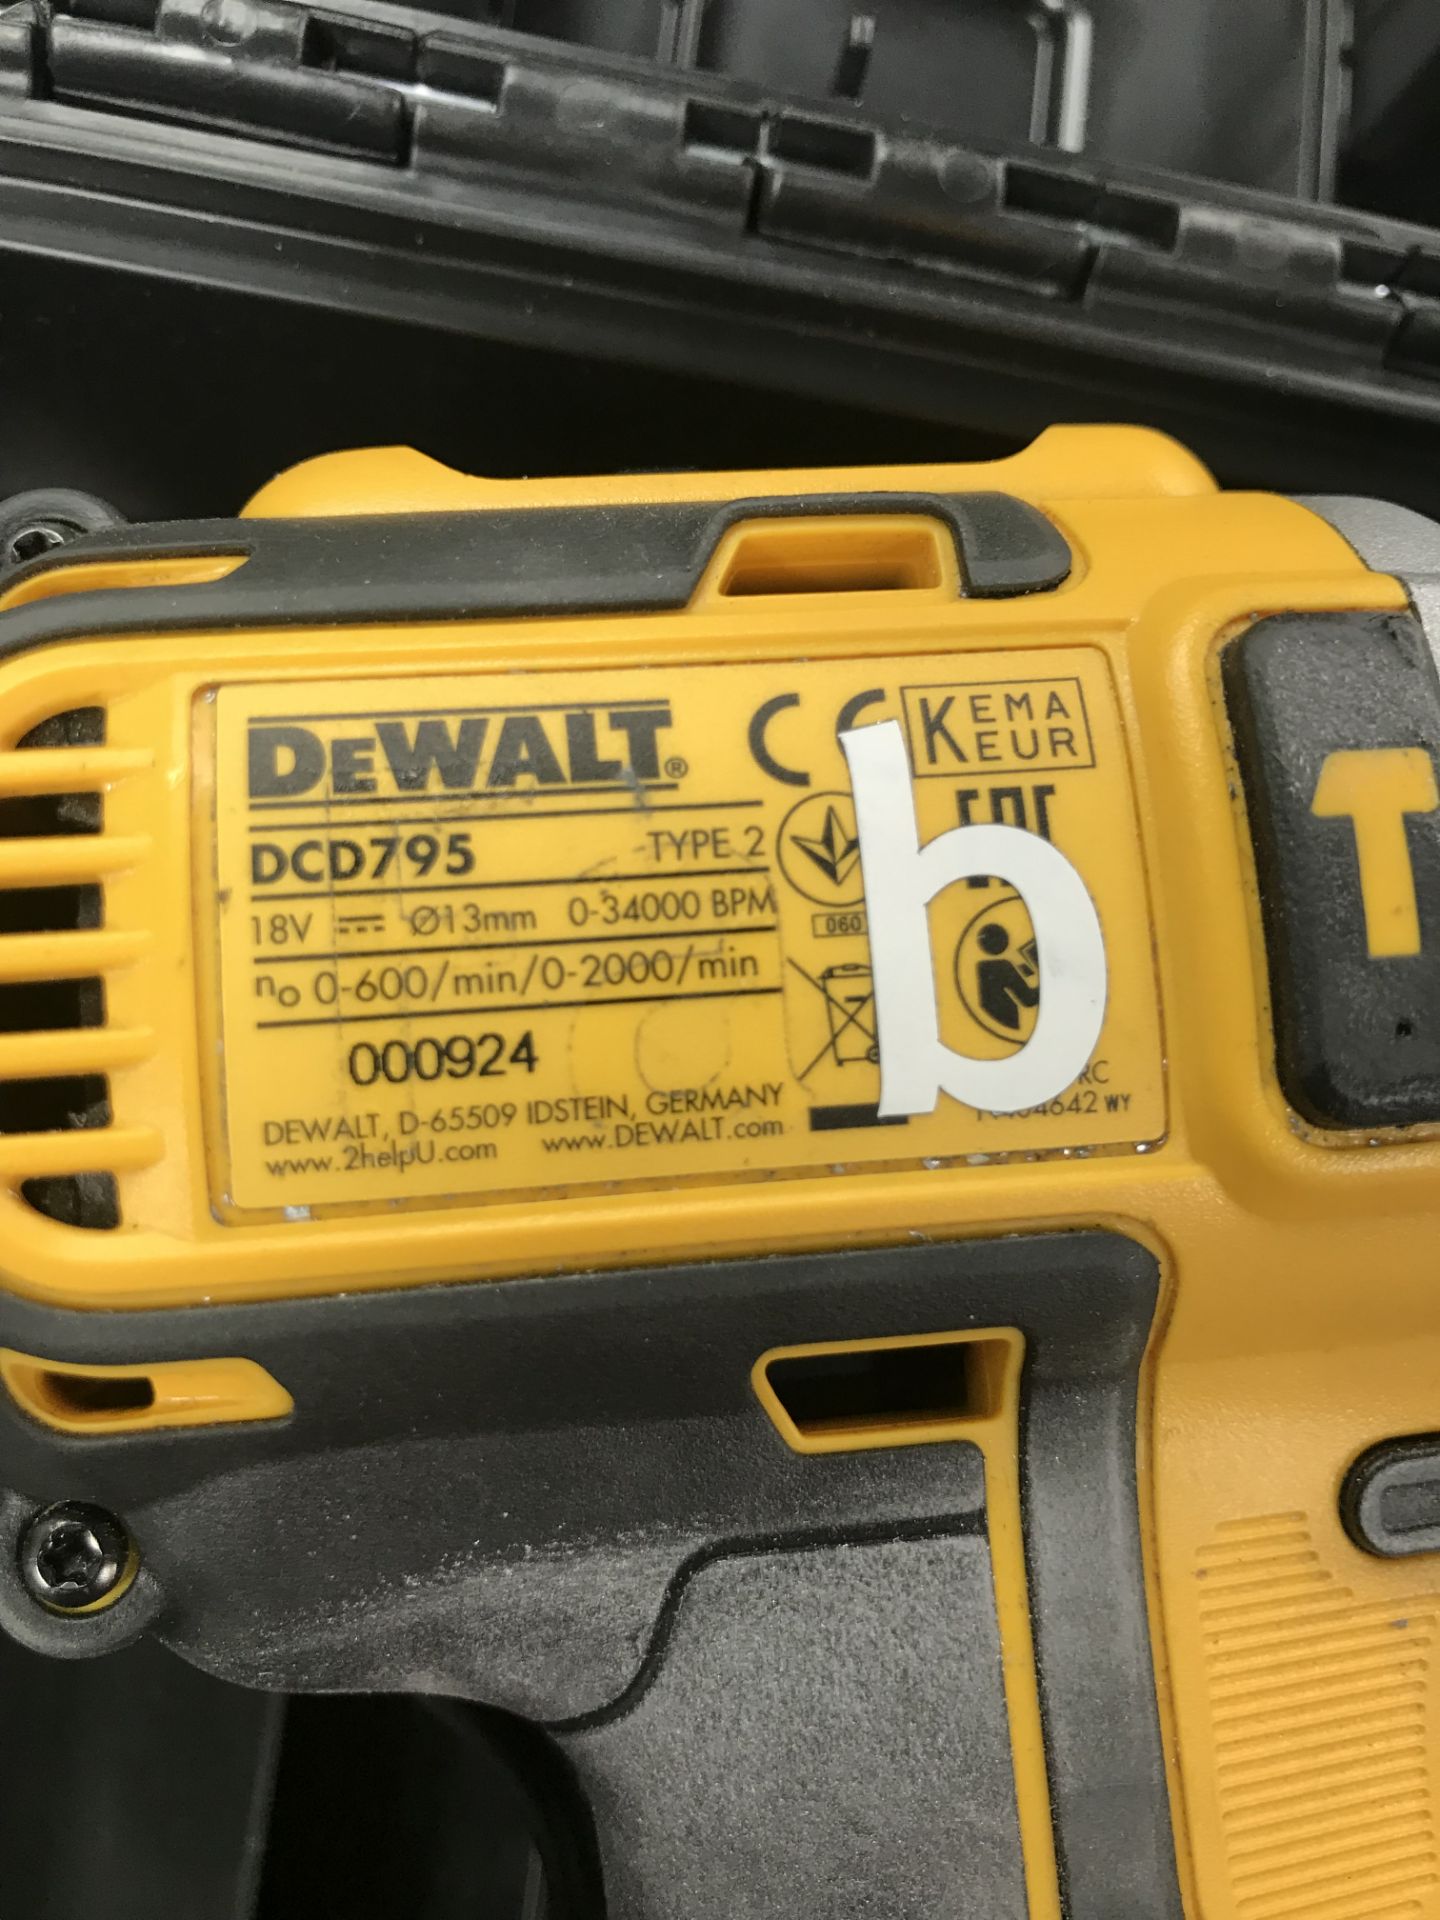 Dewalt DCD795 Brushless Combi Drill w/ Case, Charger & Spare Battery - Image 3 of 3